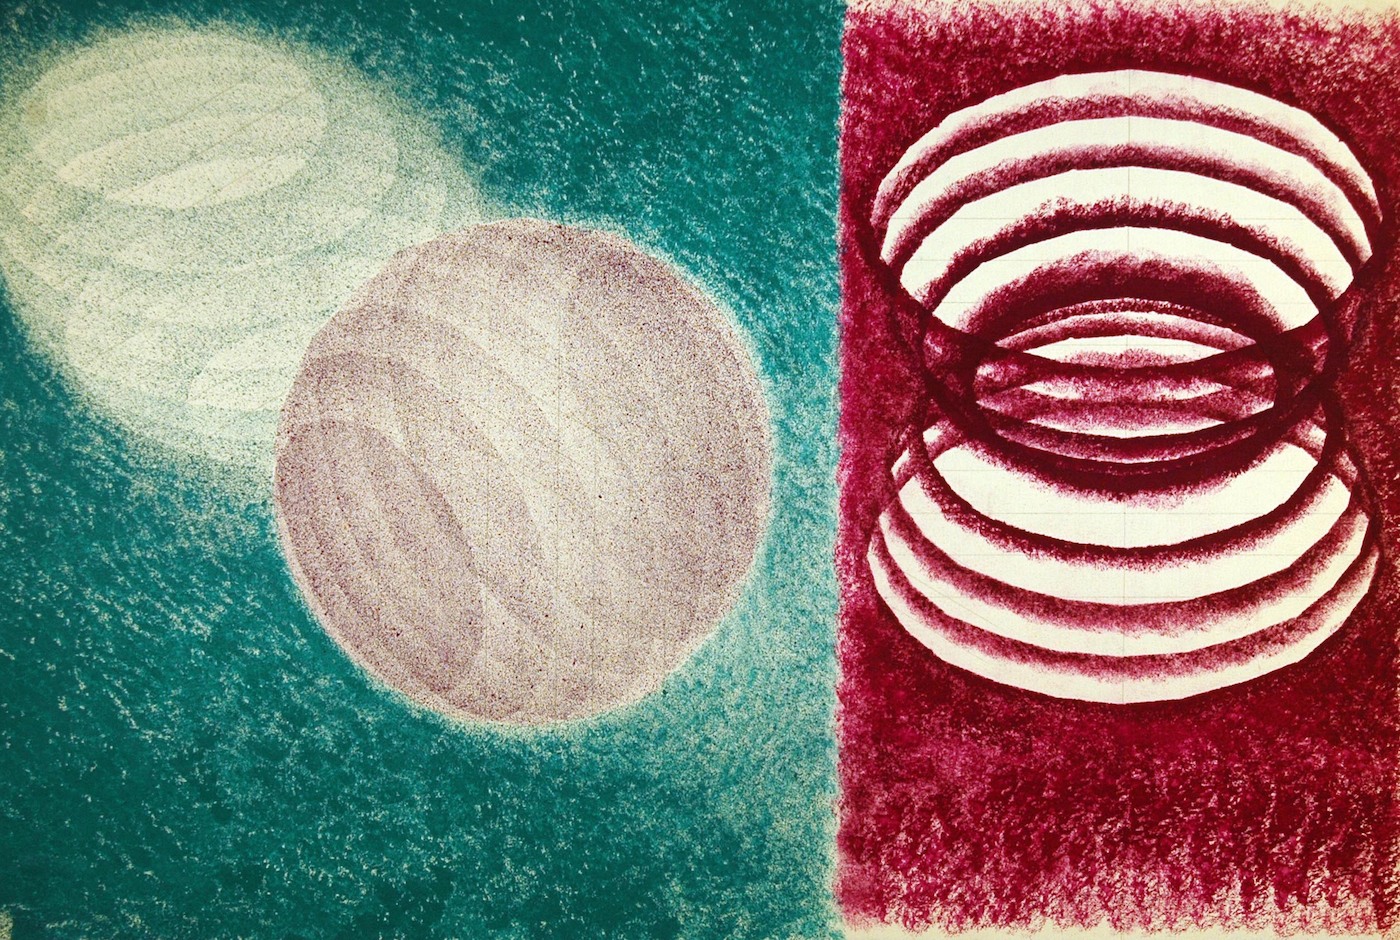 Spheres and Sections